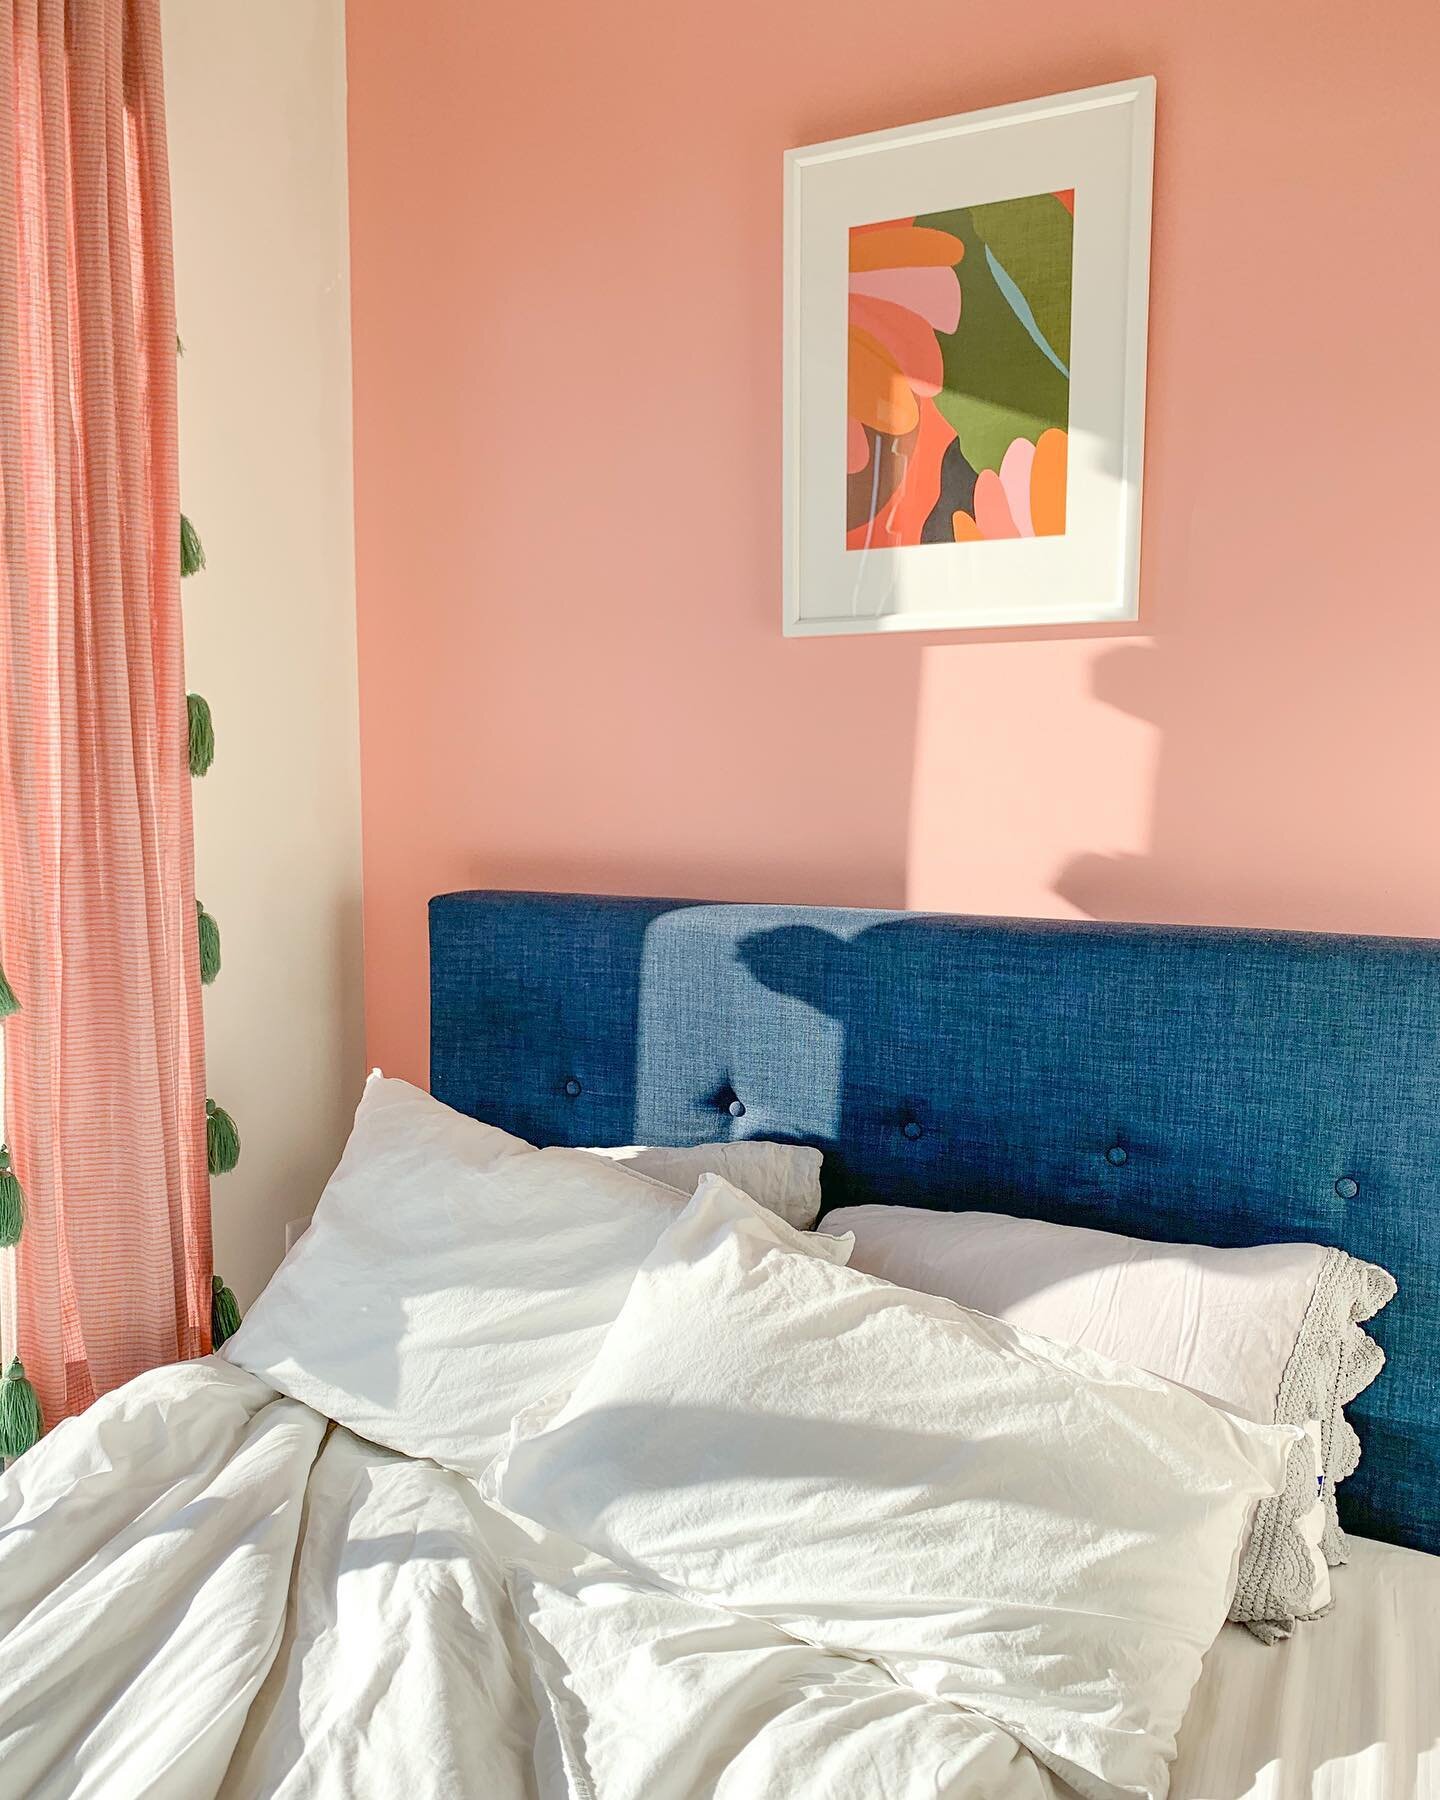 Being on the fence about my personal apartment decor was so much easier pre-pandemic. However, months of quarantine made my decision very clear. No travel and no vacations meant I need my space to feel colorful, and warm like the West Indies at all t